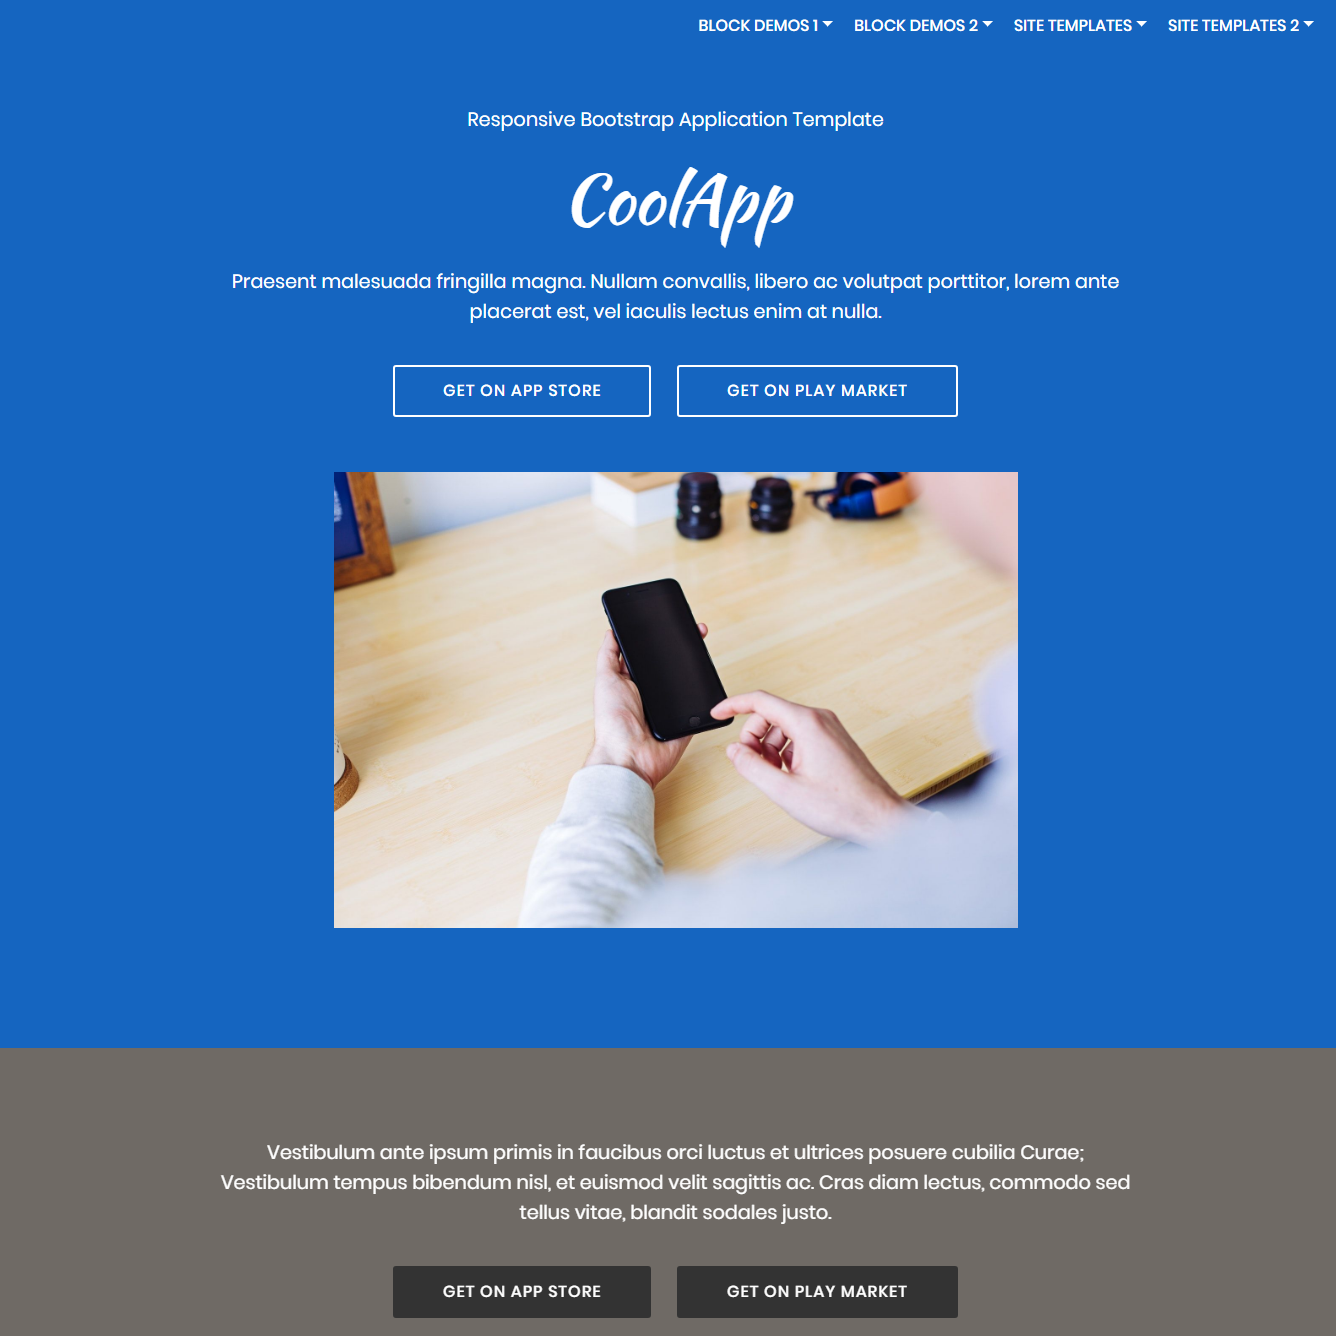 Responsive Bootstrap Application Templates